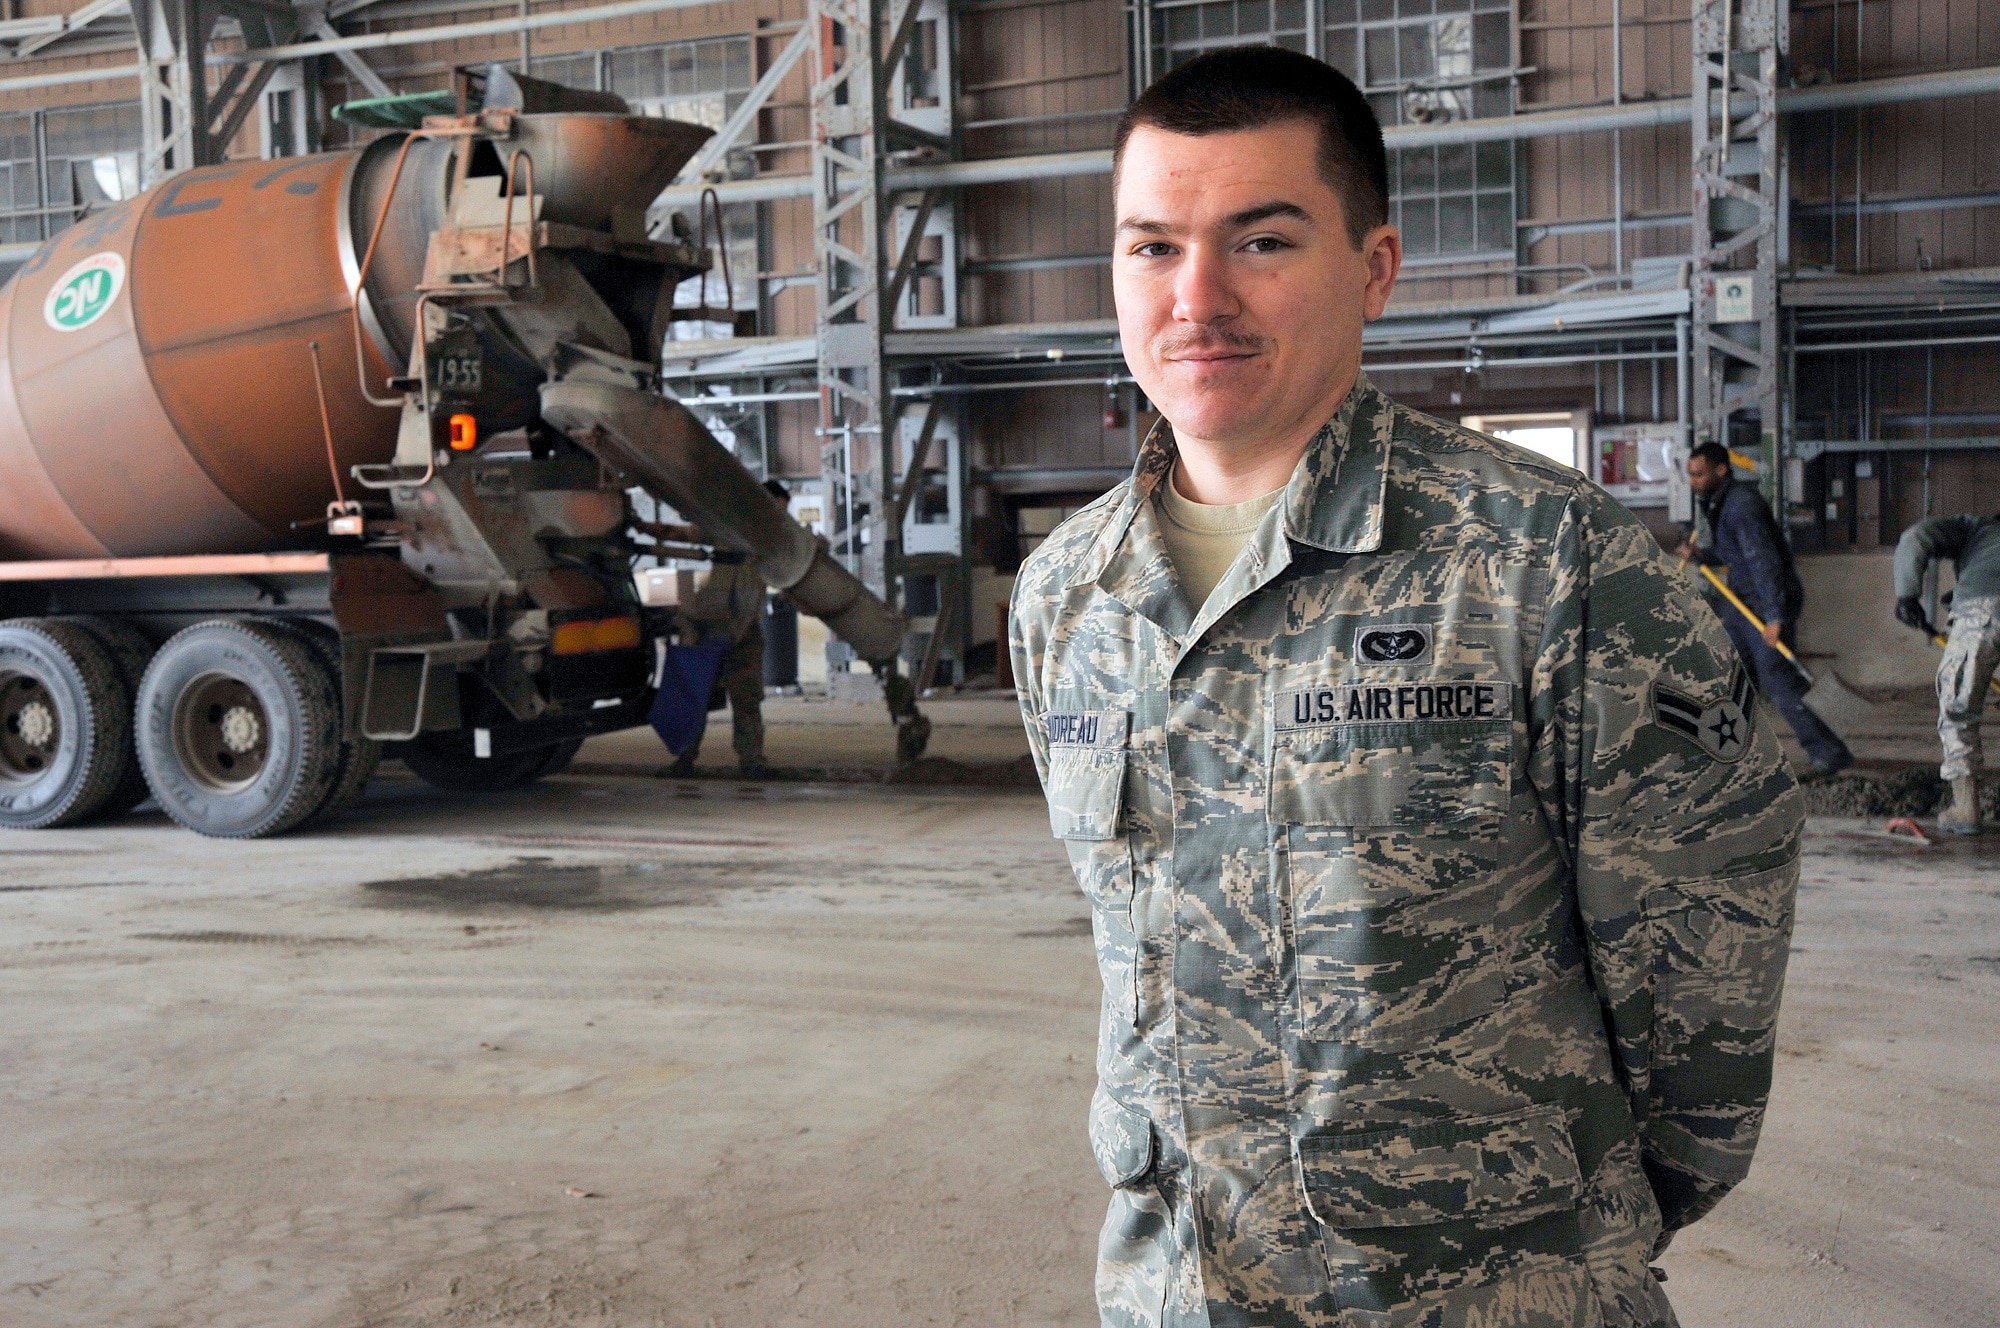 U.S. Air Force Airman 1st Class Jim Boudreau, 35th Civil Engineer Squadron structural apprentice, poses in front of paving equipment used at Misawa Air Base, Japan, Mar. 19, 2015. Boudreau and the team of structural maintainers he is part of ensure upkeep of base facilities and infrastructure across Misawa AB. (U.S. Air Force photo by Senior Airman Jose L. Hernandez-Domitilo/Released)